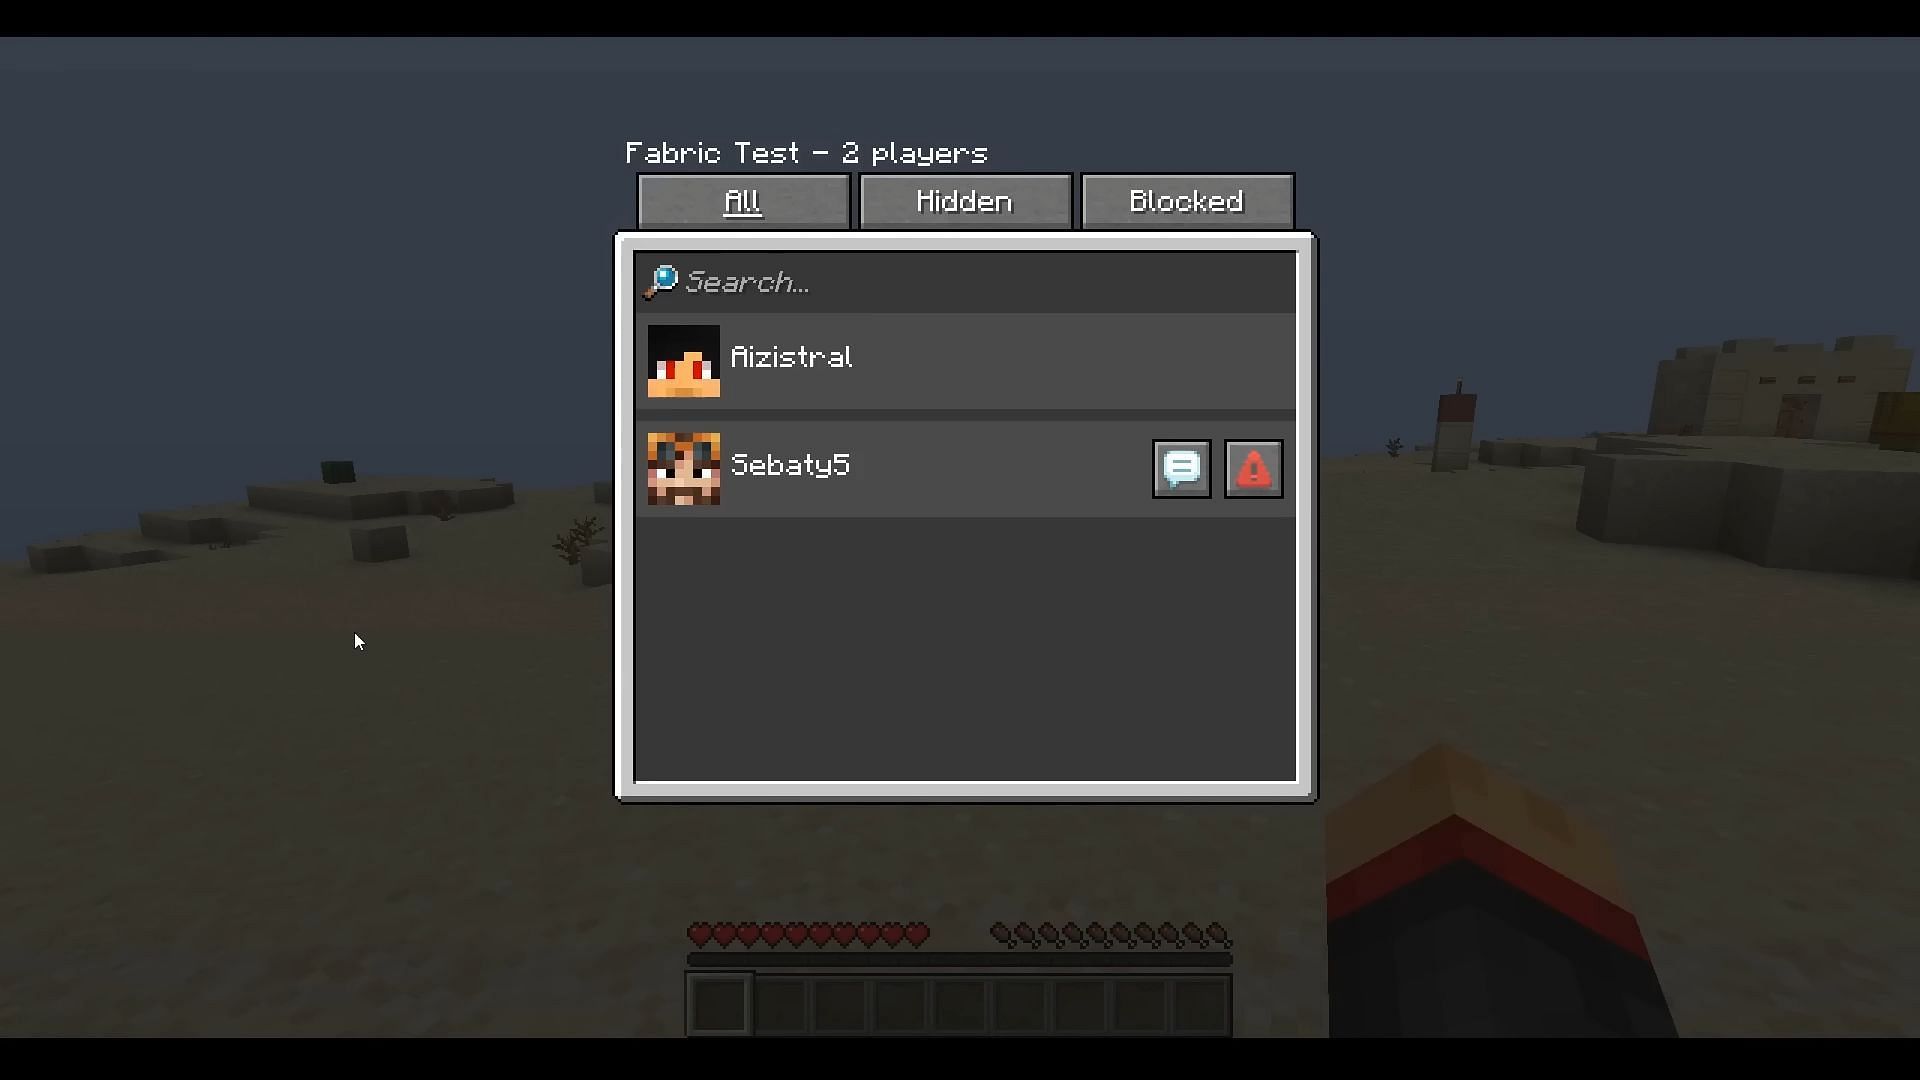 An example of the Java Edition report window (Image via Minecraft)